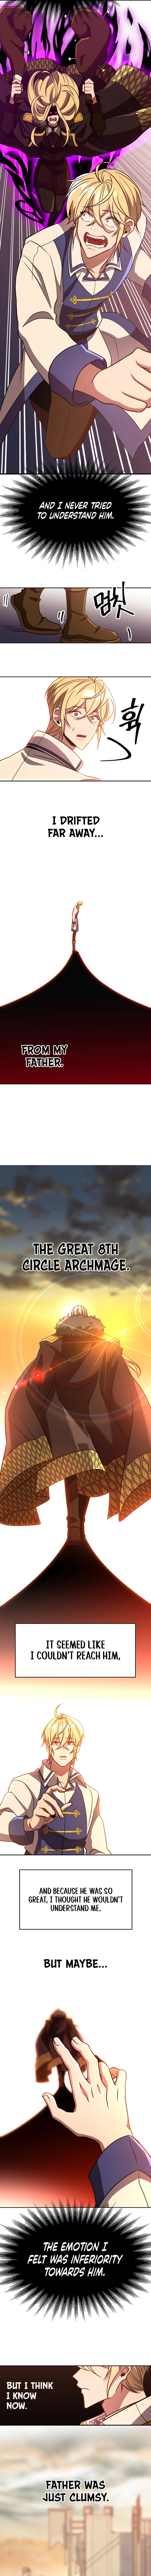 Archmage Transcending Through Regression - Chapter 92 Page 5